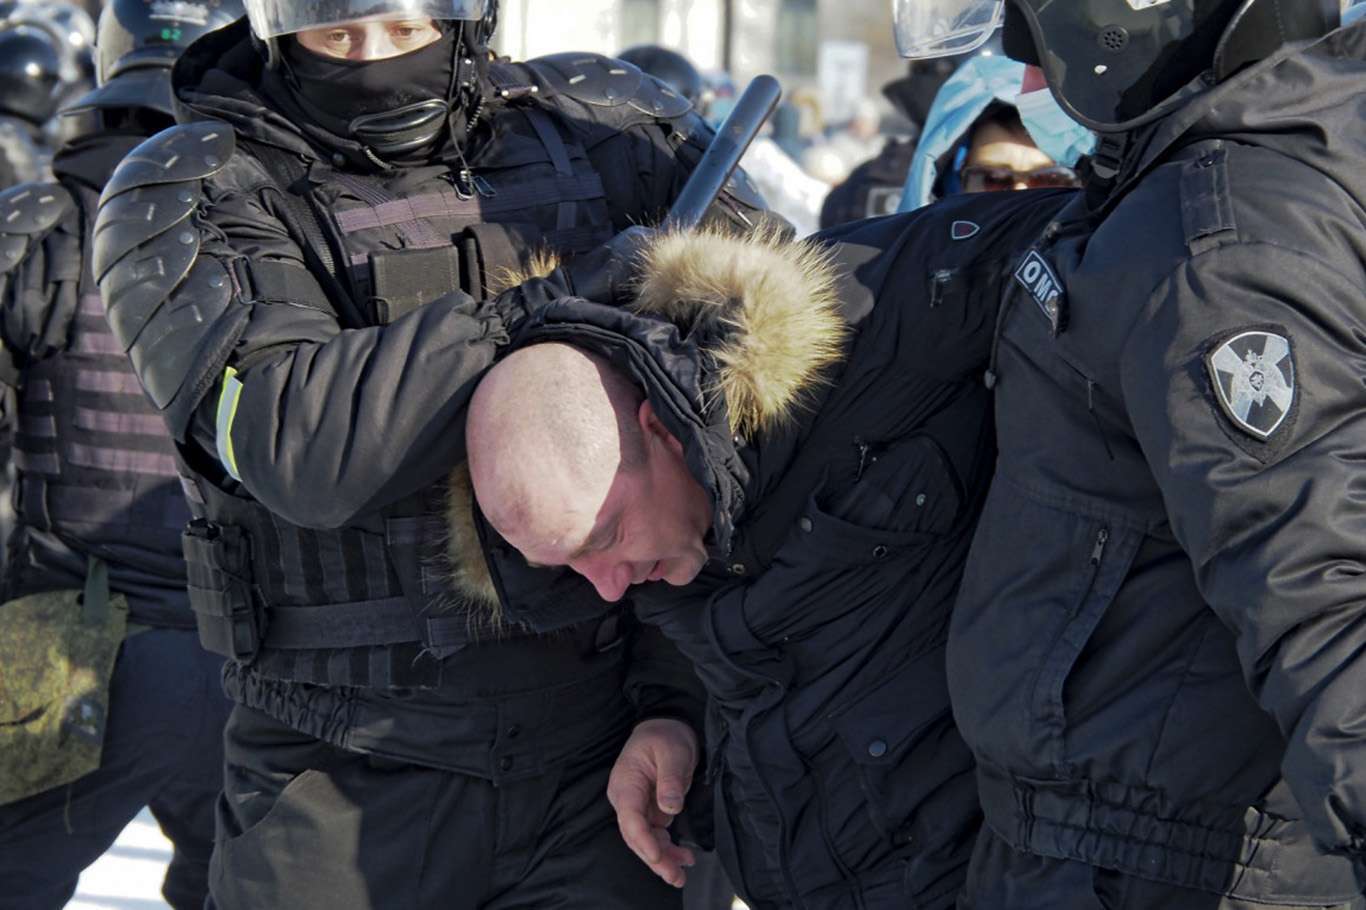 Russian police arrest more than 1,000 protesters demanding Navalny’s release